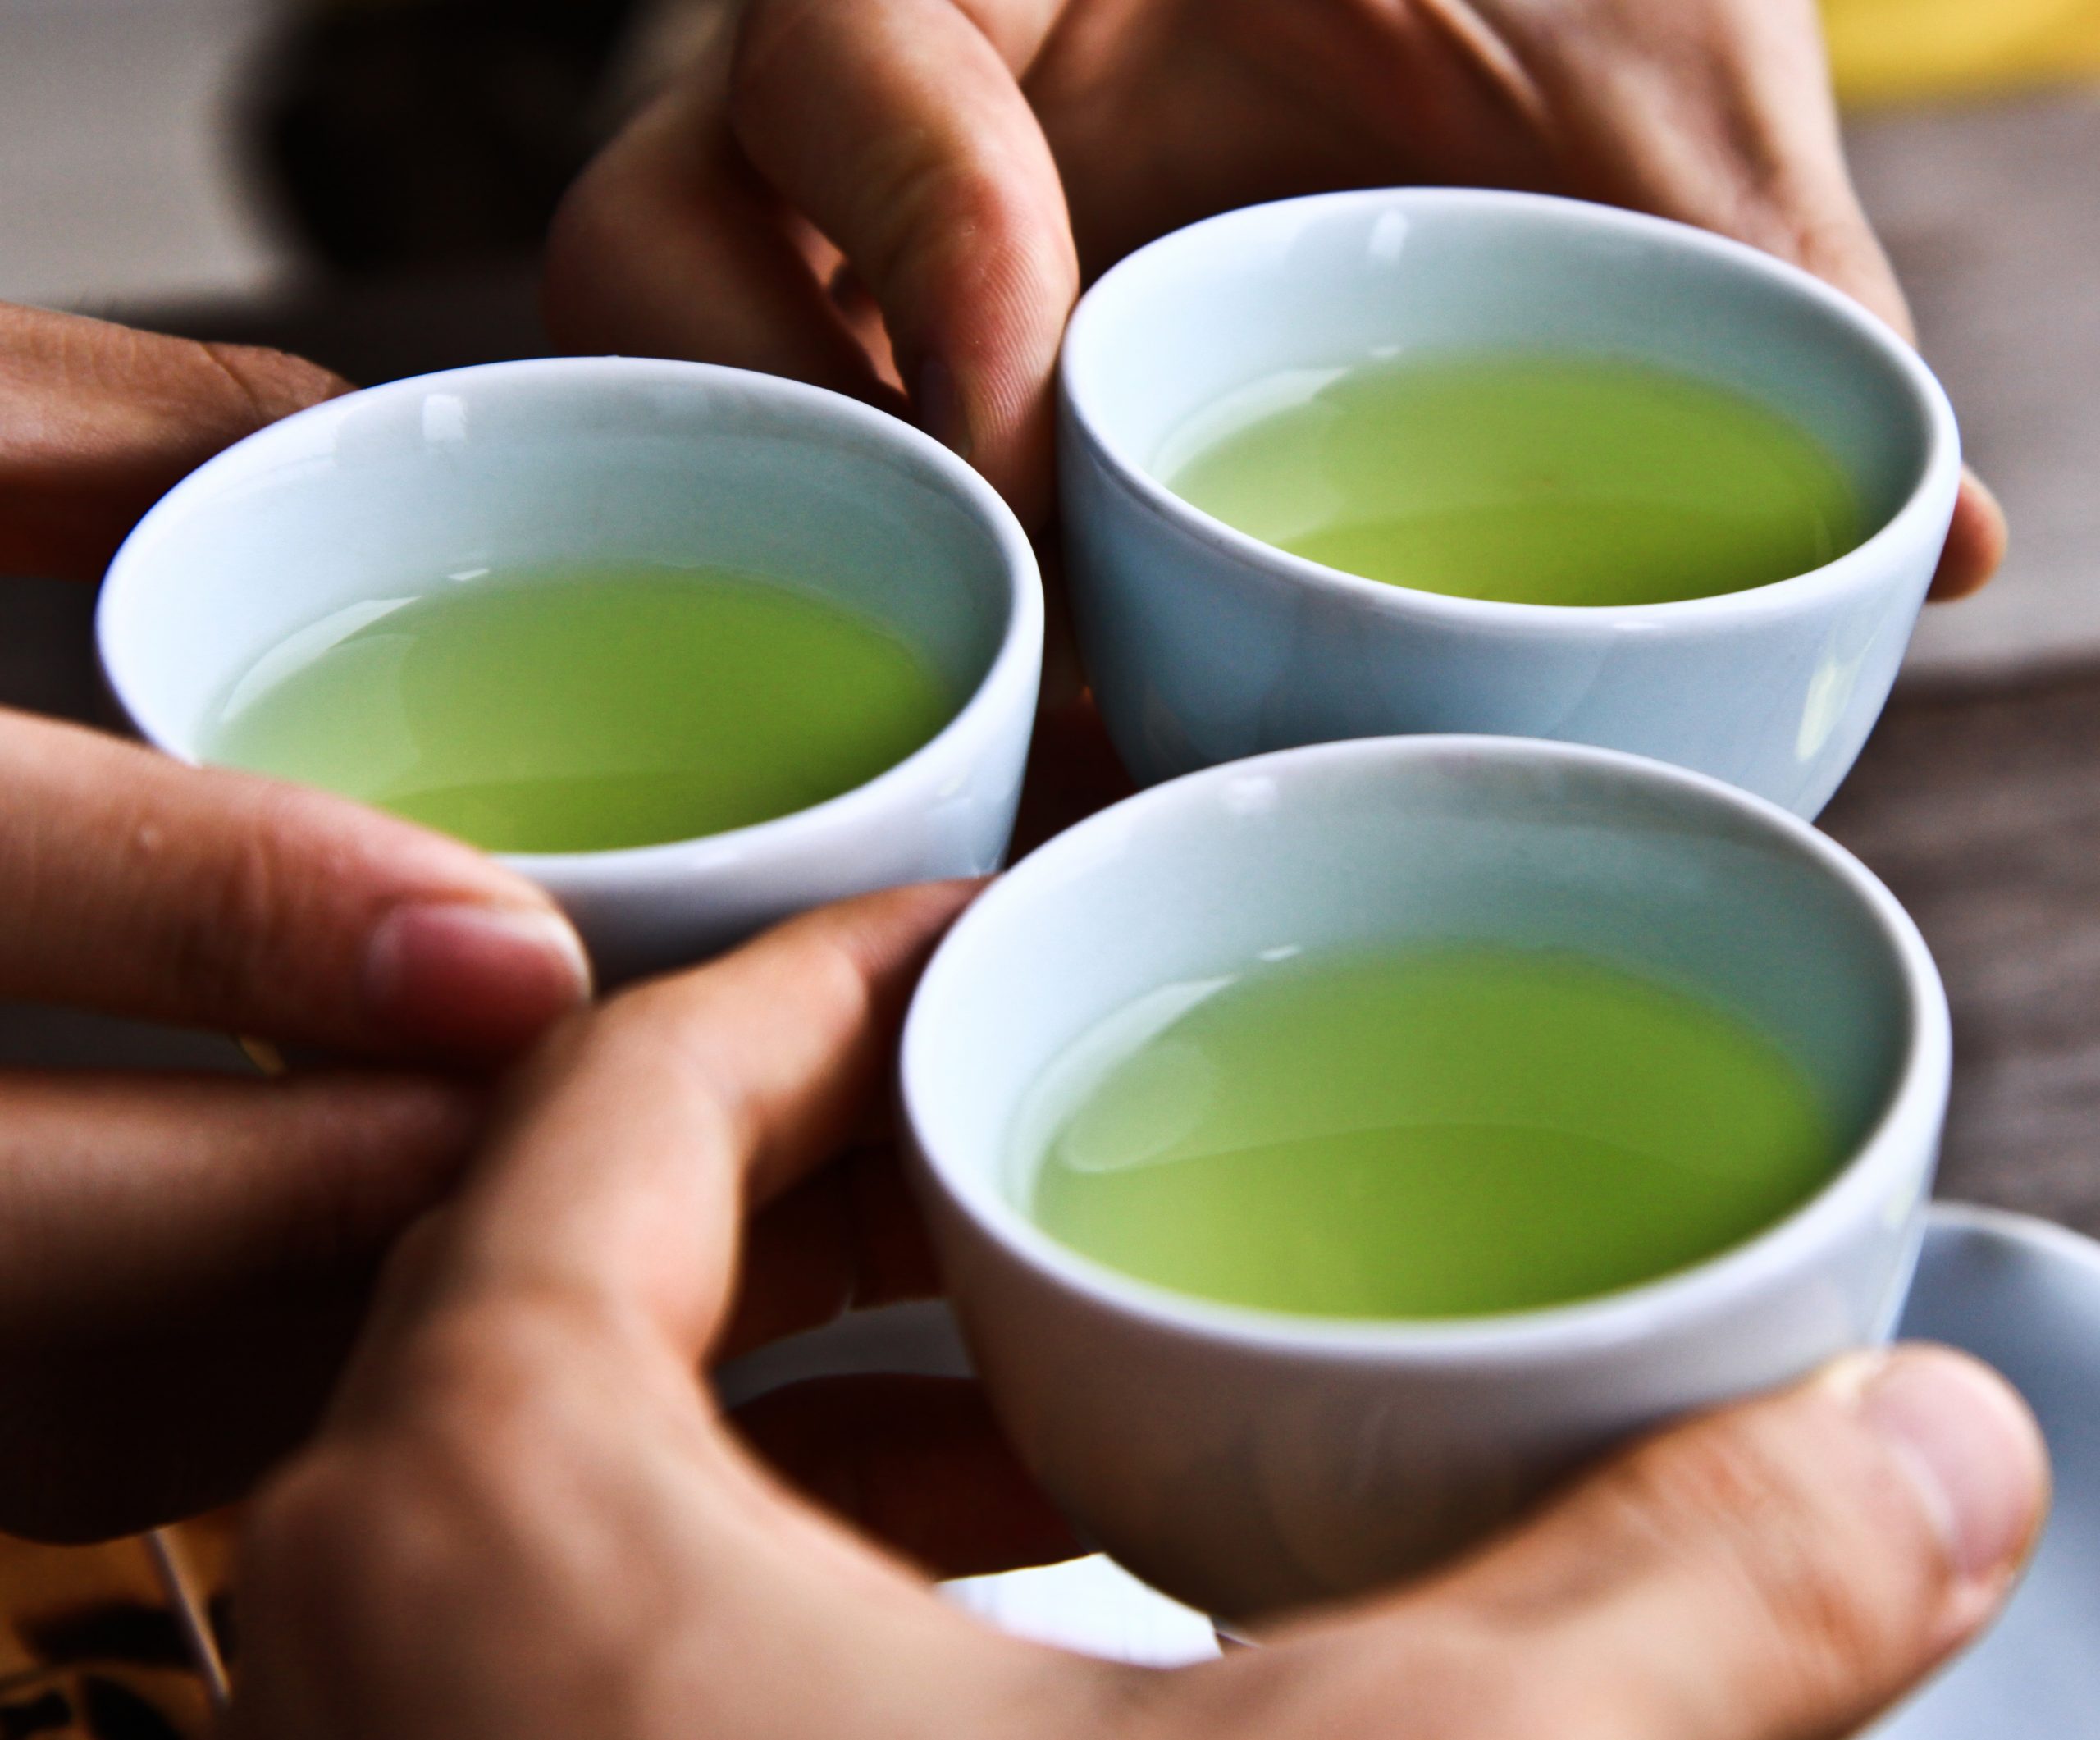 3 white cups containing clear, pale green tea - fingers of hands touching cups